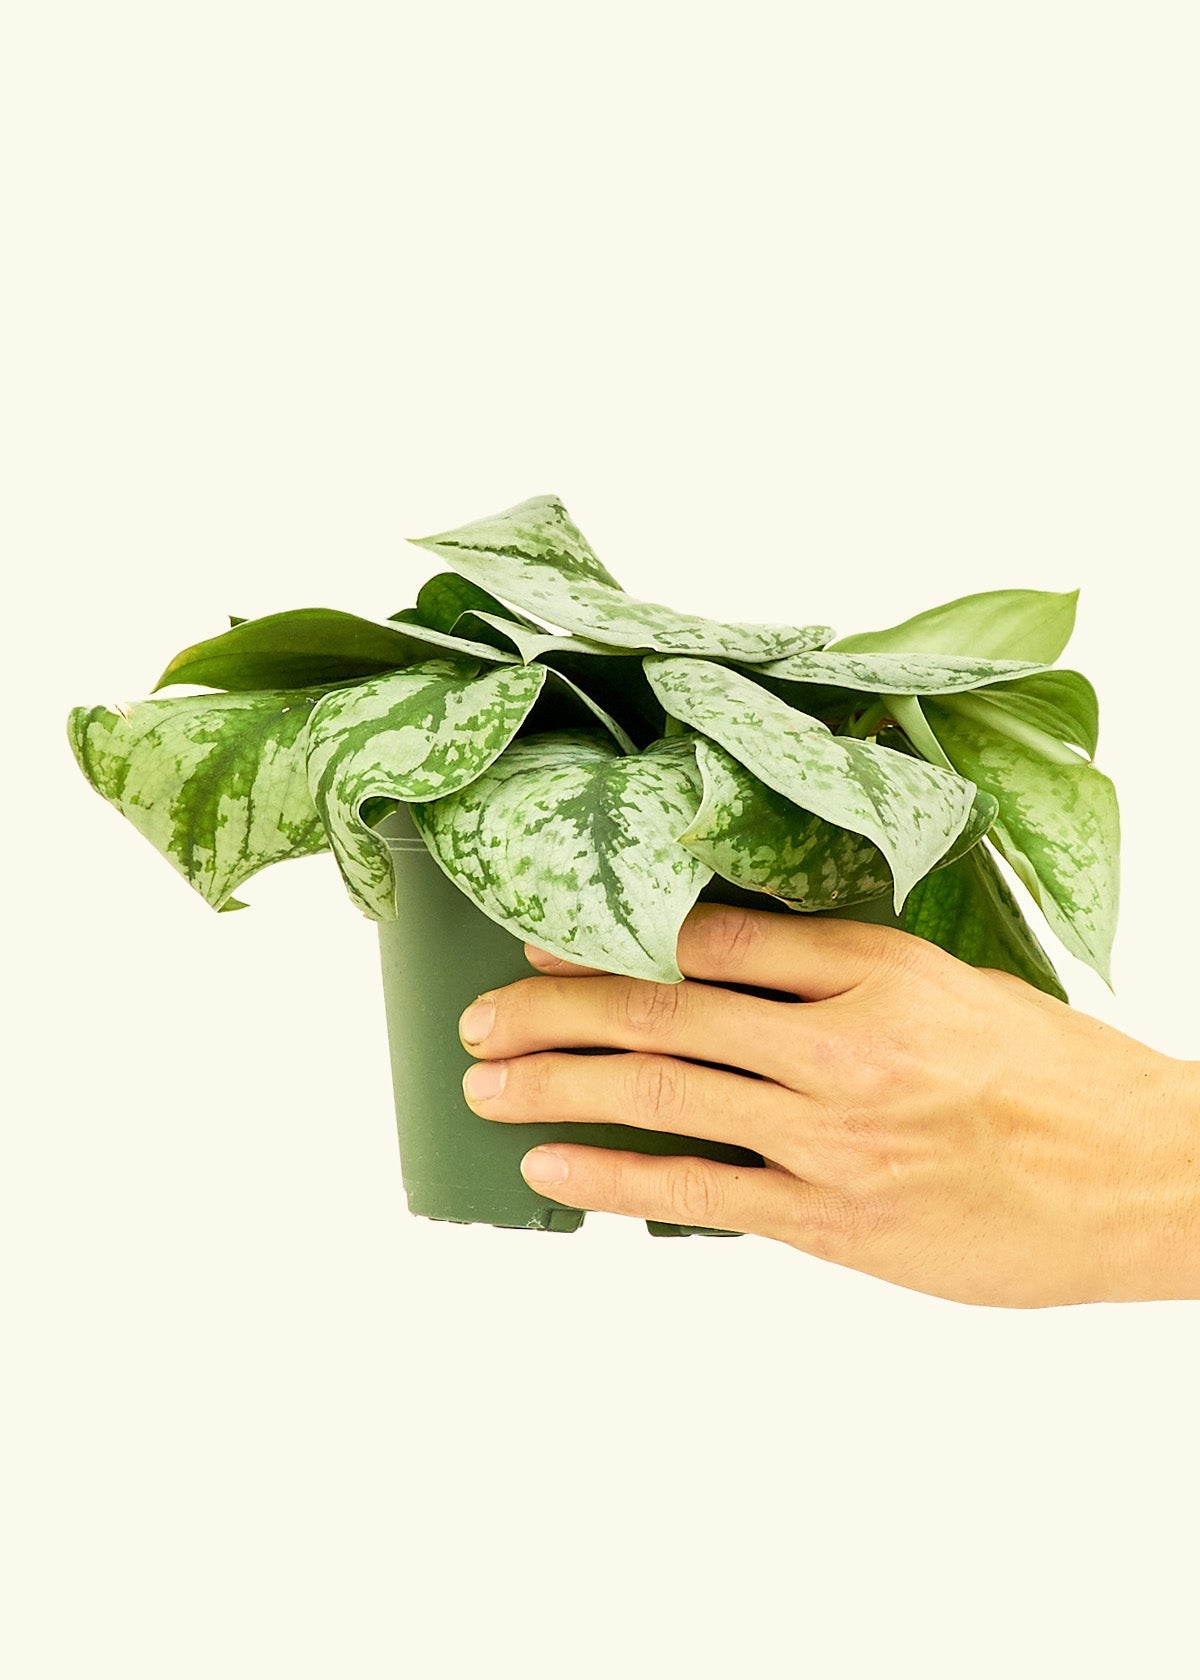 Silver Pothos 'Exotica' pictus 'Exotica') – Rooted